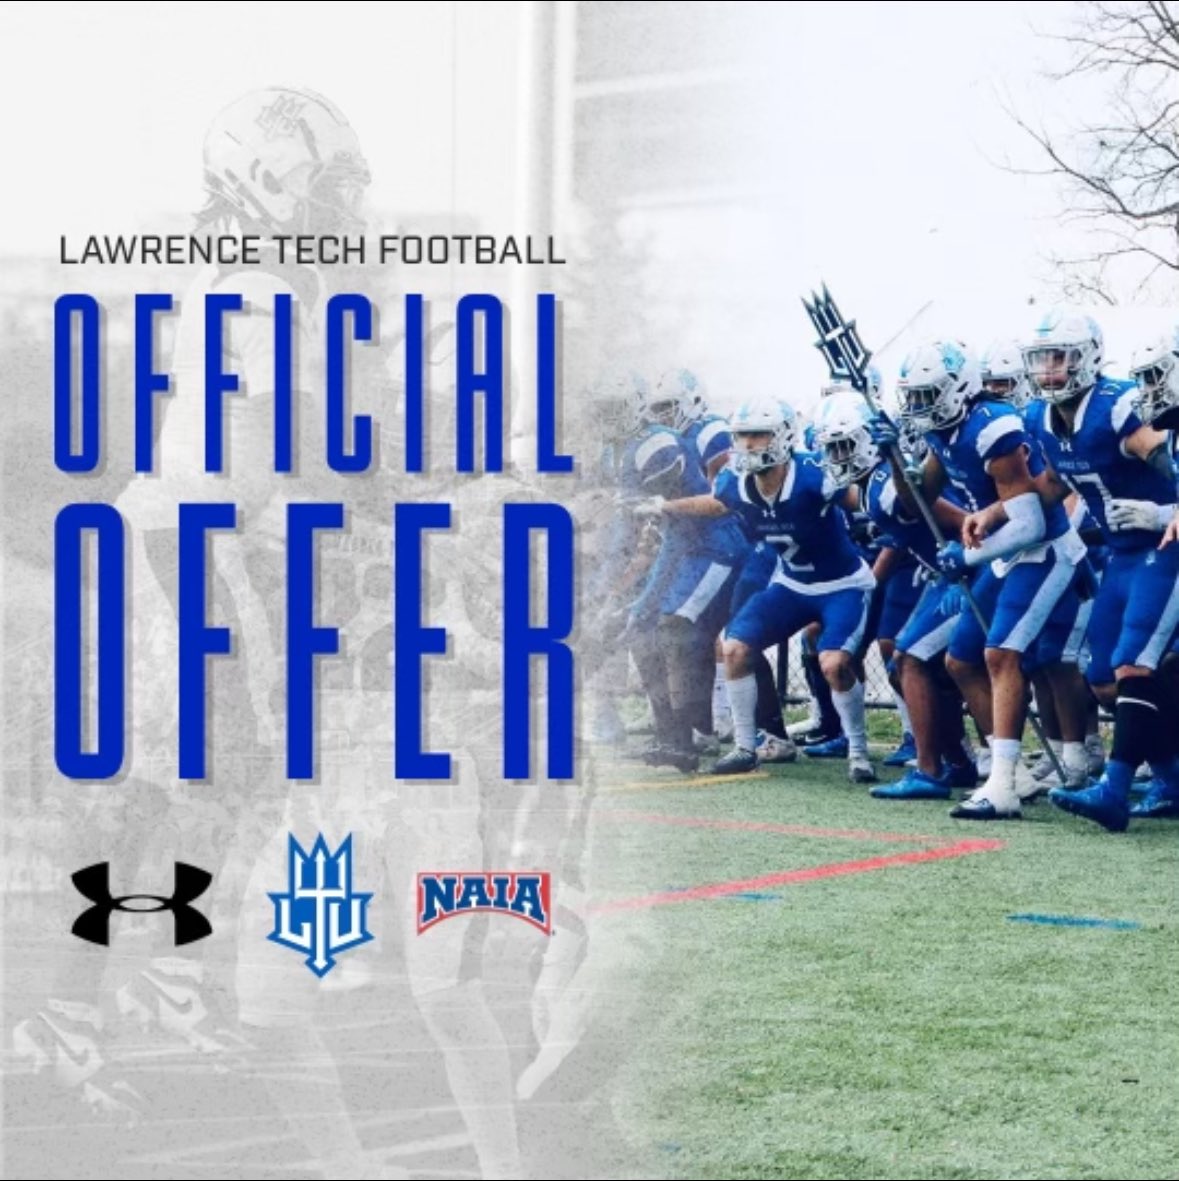 After a great visit, I am blessed to say I have received an offer from @LTU_FB!! @CoachMerchLTU @Alex_OBrien16 @CoachOlejniczak @DenryterQB @CVBigReds @will_bobek2